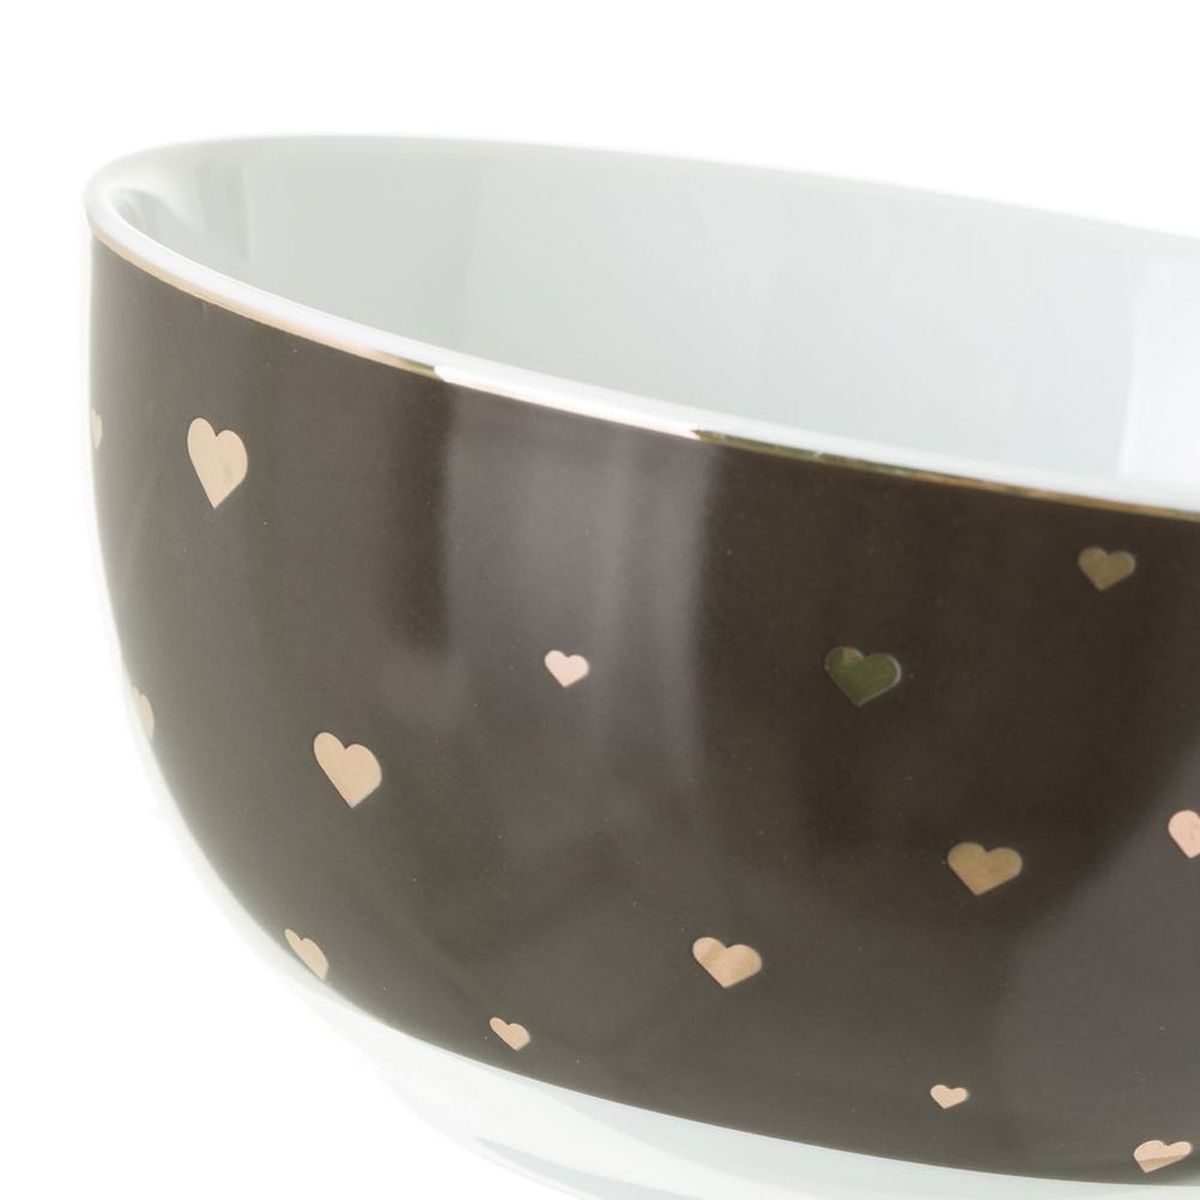 Gray porcelain bowl with small gold hearts